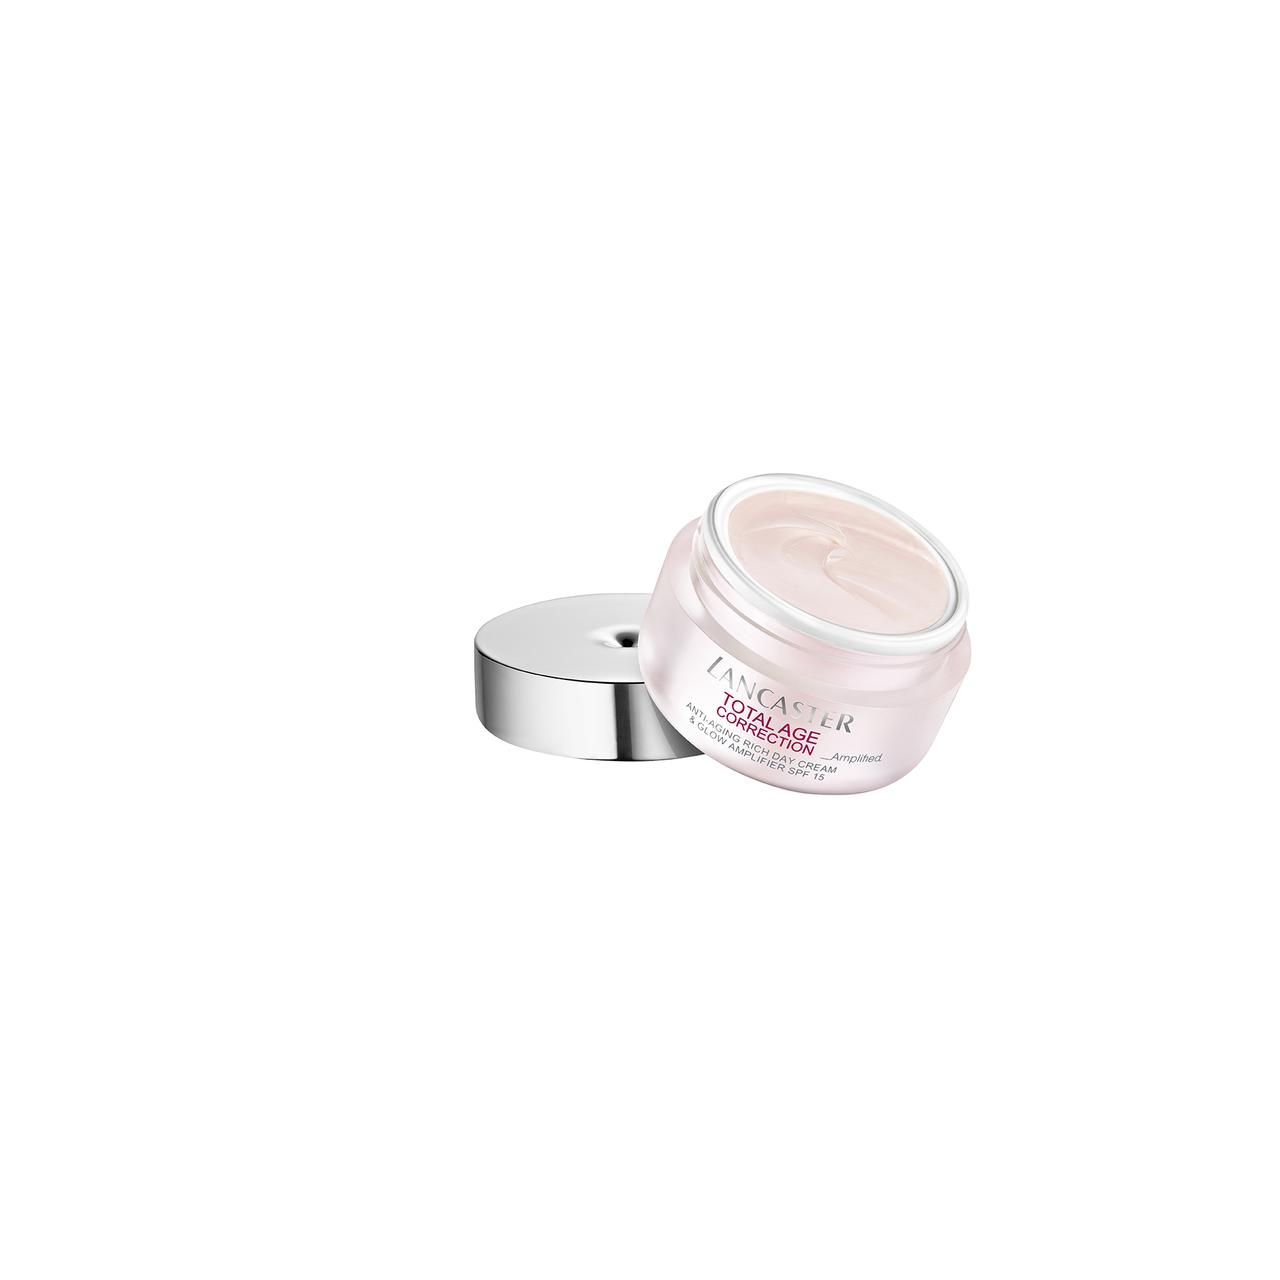 Lancaster, Total Age Correction Anti-Aging Rich Day Cream & Glow Amplifier SPF 15